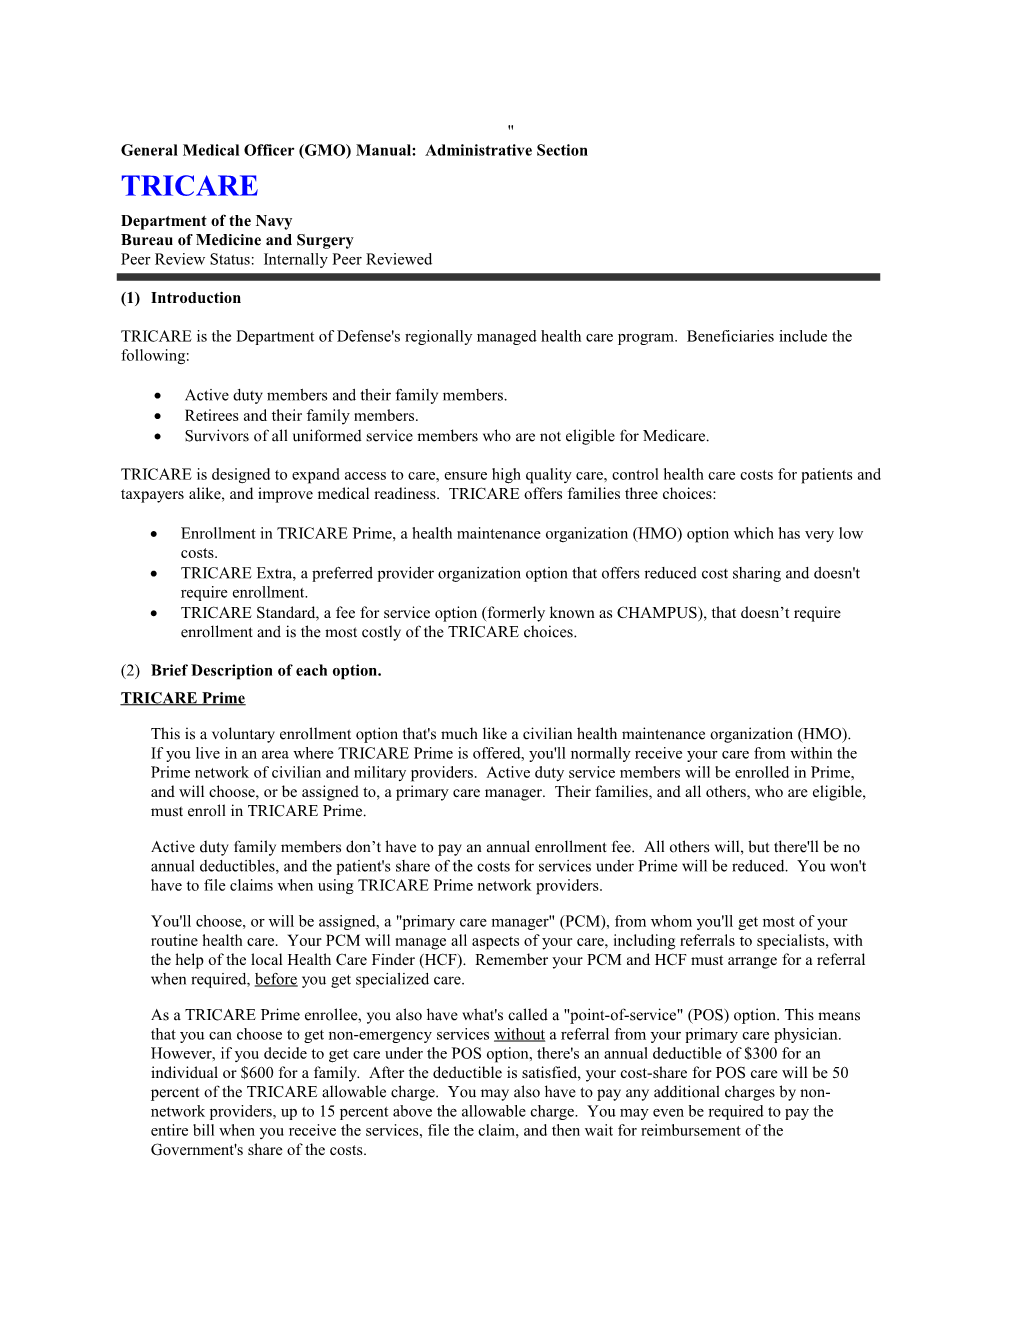 General Medical Officer (GMO) Manual: TRICARE